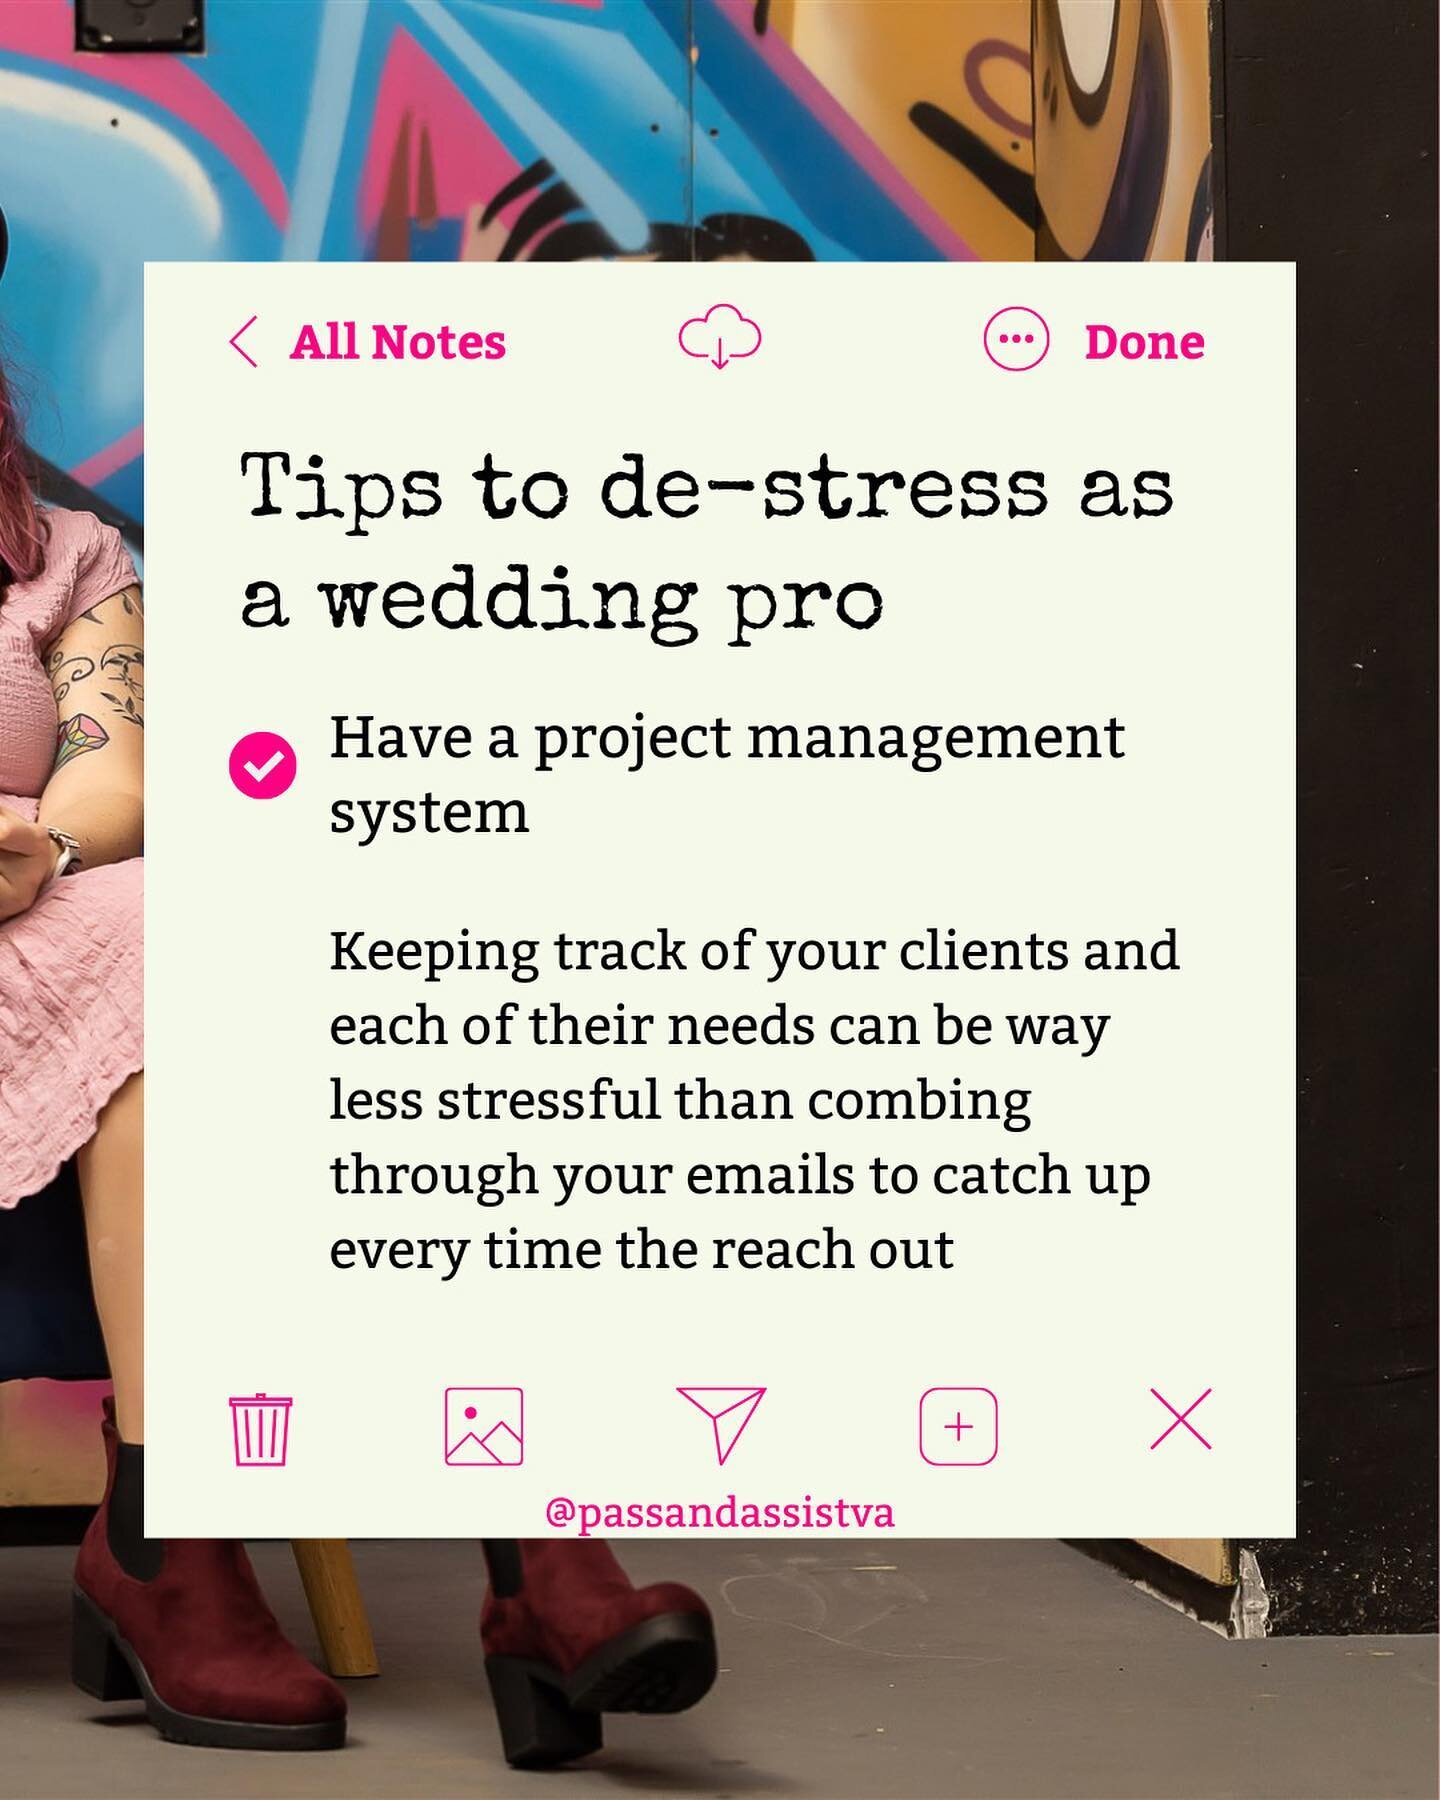 Feeling the stress of wedding season this summer? 
⠀⠀⠀⠀⠀⠀⠀⠀⠀
Even though weddings have dropped back towards the norms before The Great Rescheduling, it's still easy to get overwhelmed after the slower winter months. 
⠀⠀⠀⠀⠀⠀⠀⠀⠀
Here are my top ways as